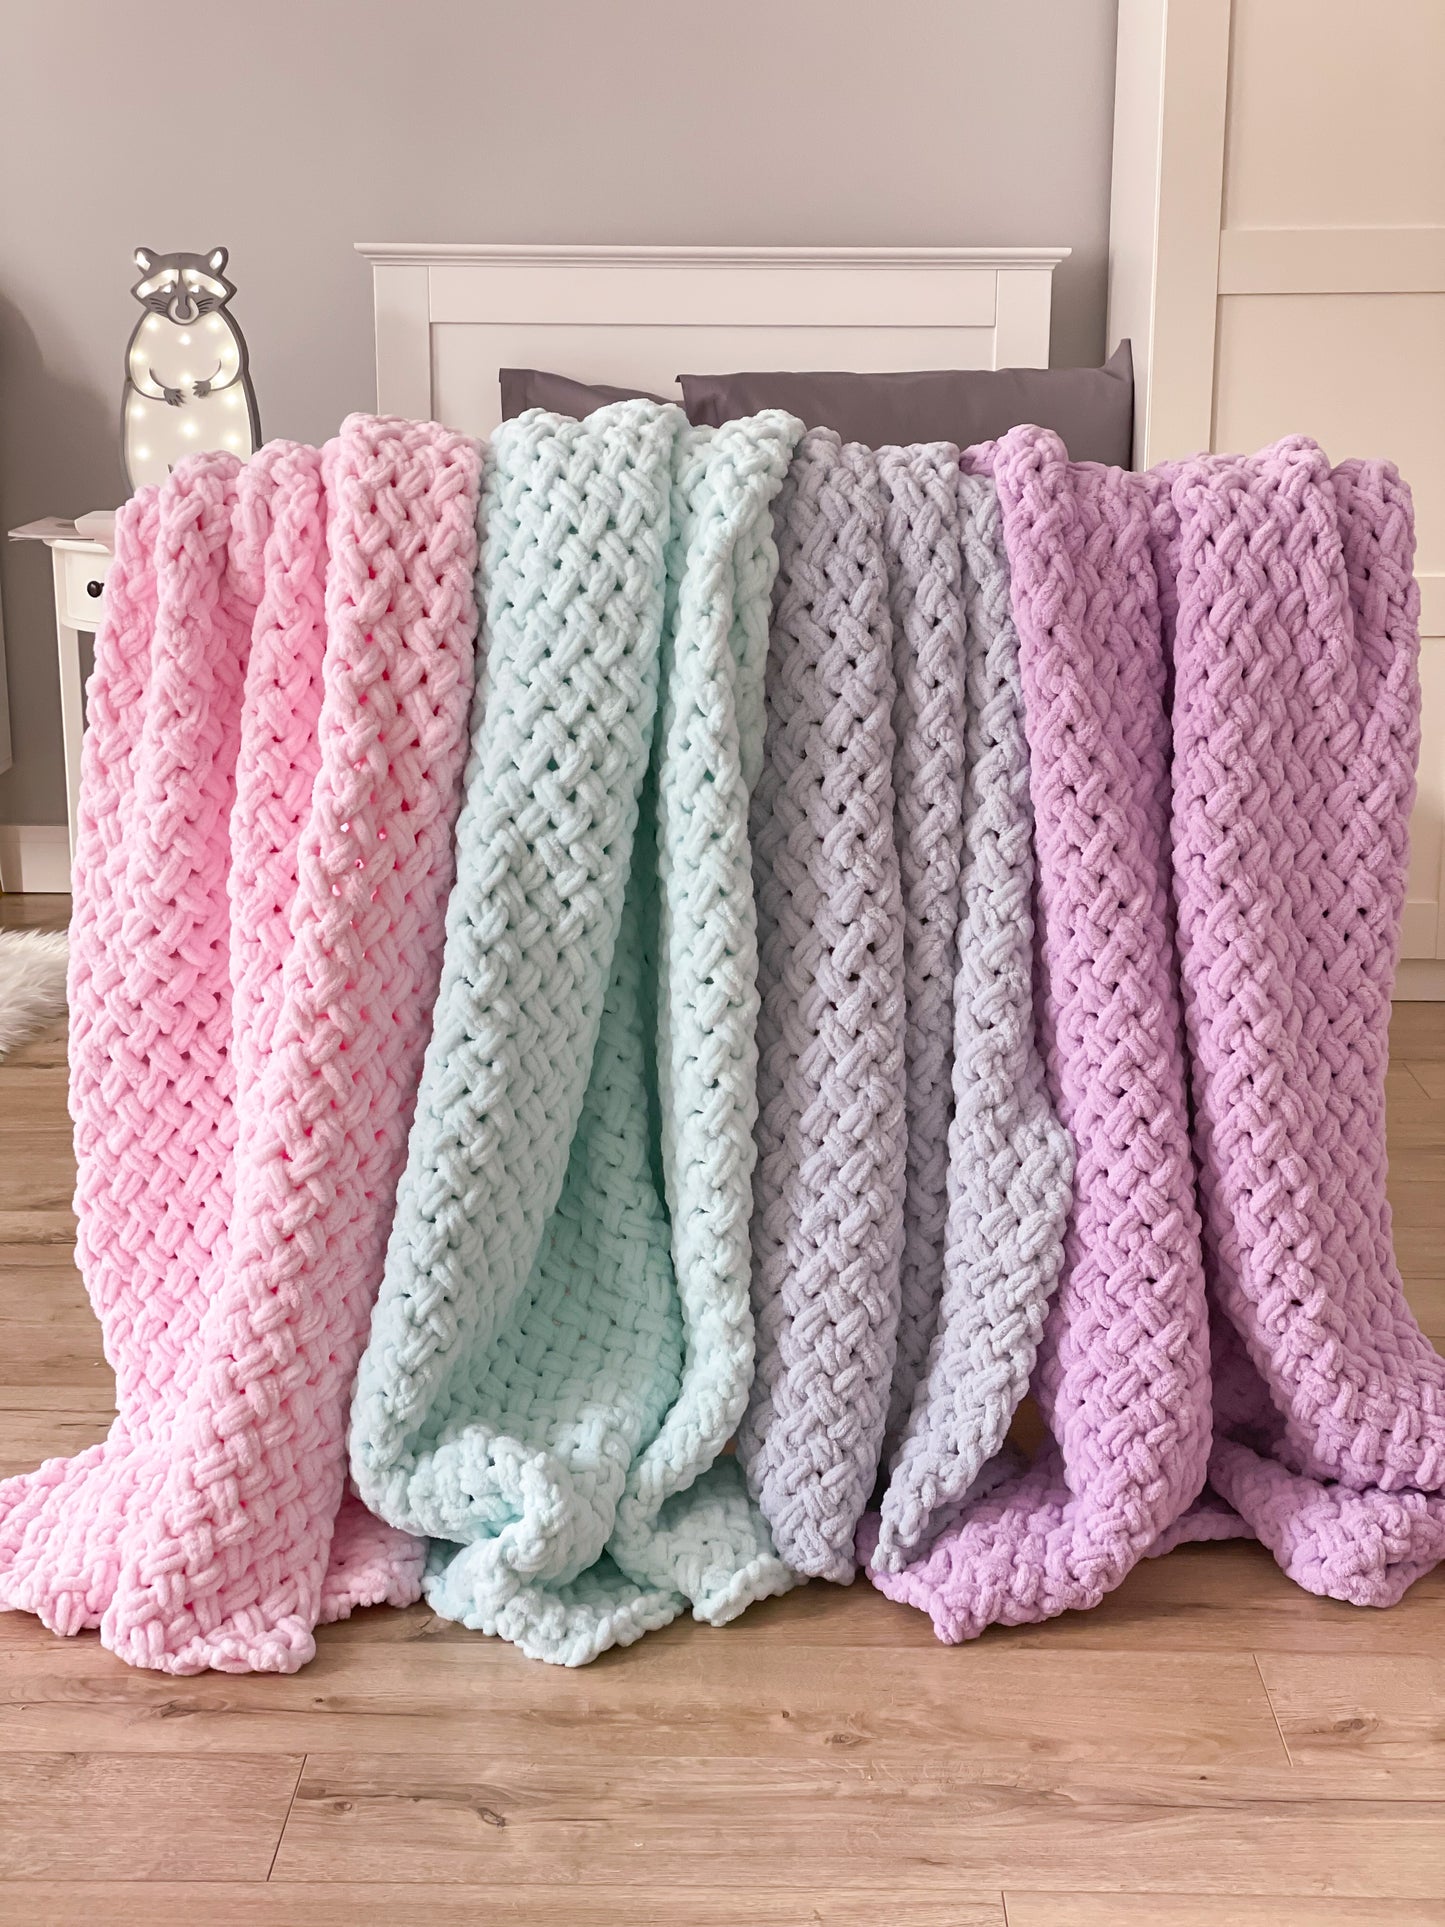 Knitted puffy blankets